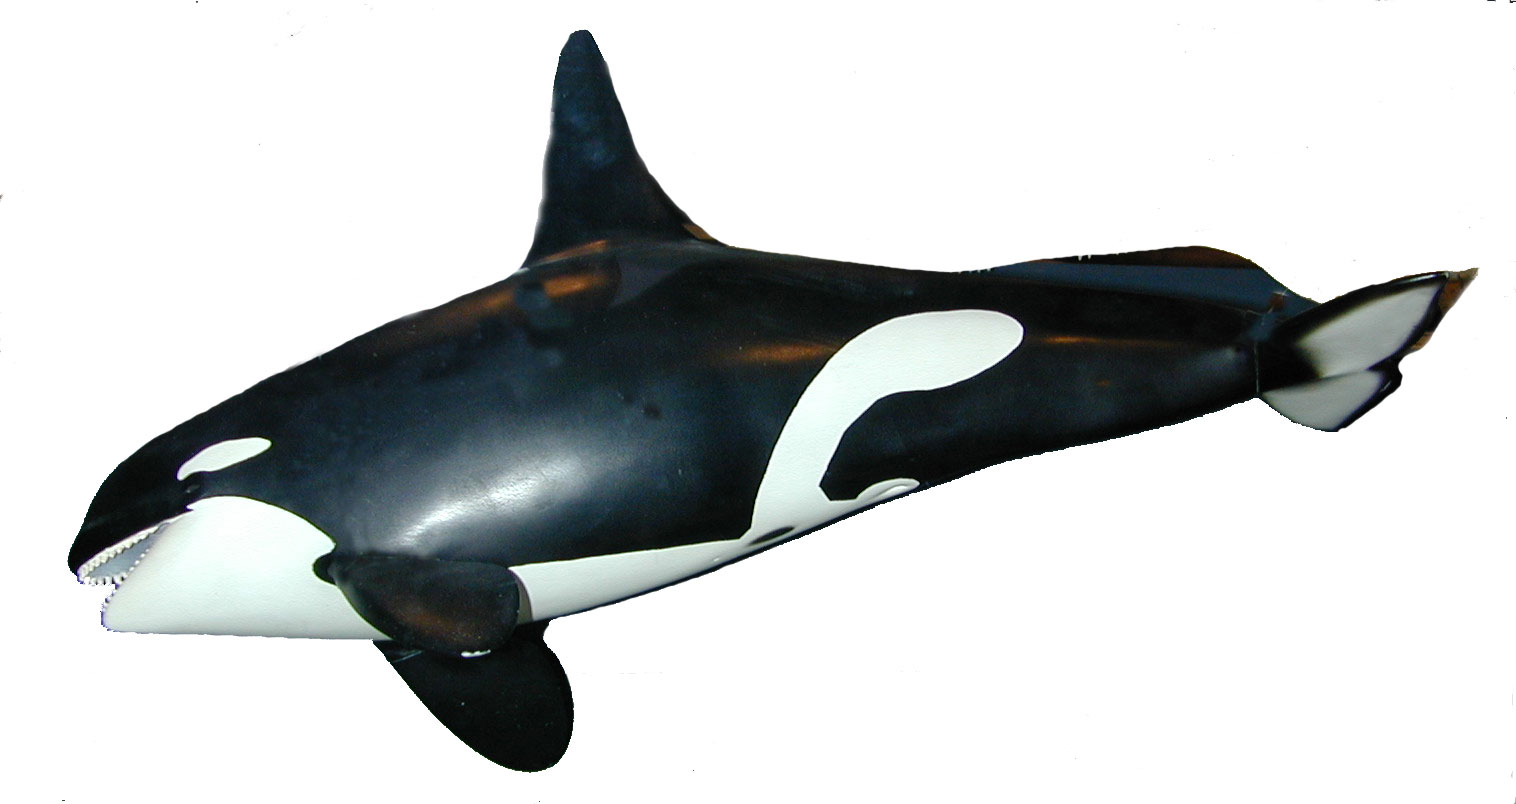 A Killer Whale Model from The Whale Museum in Friday Harbor, San Juan Island, Washington